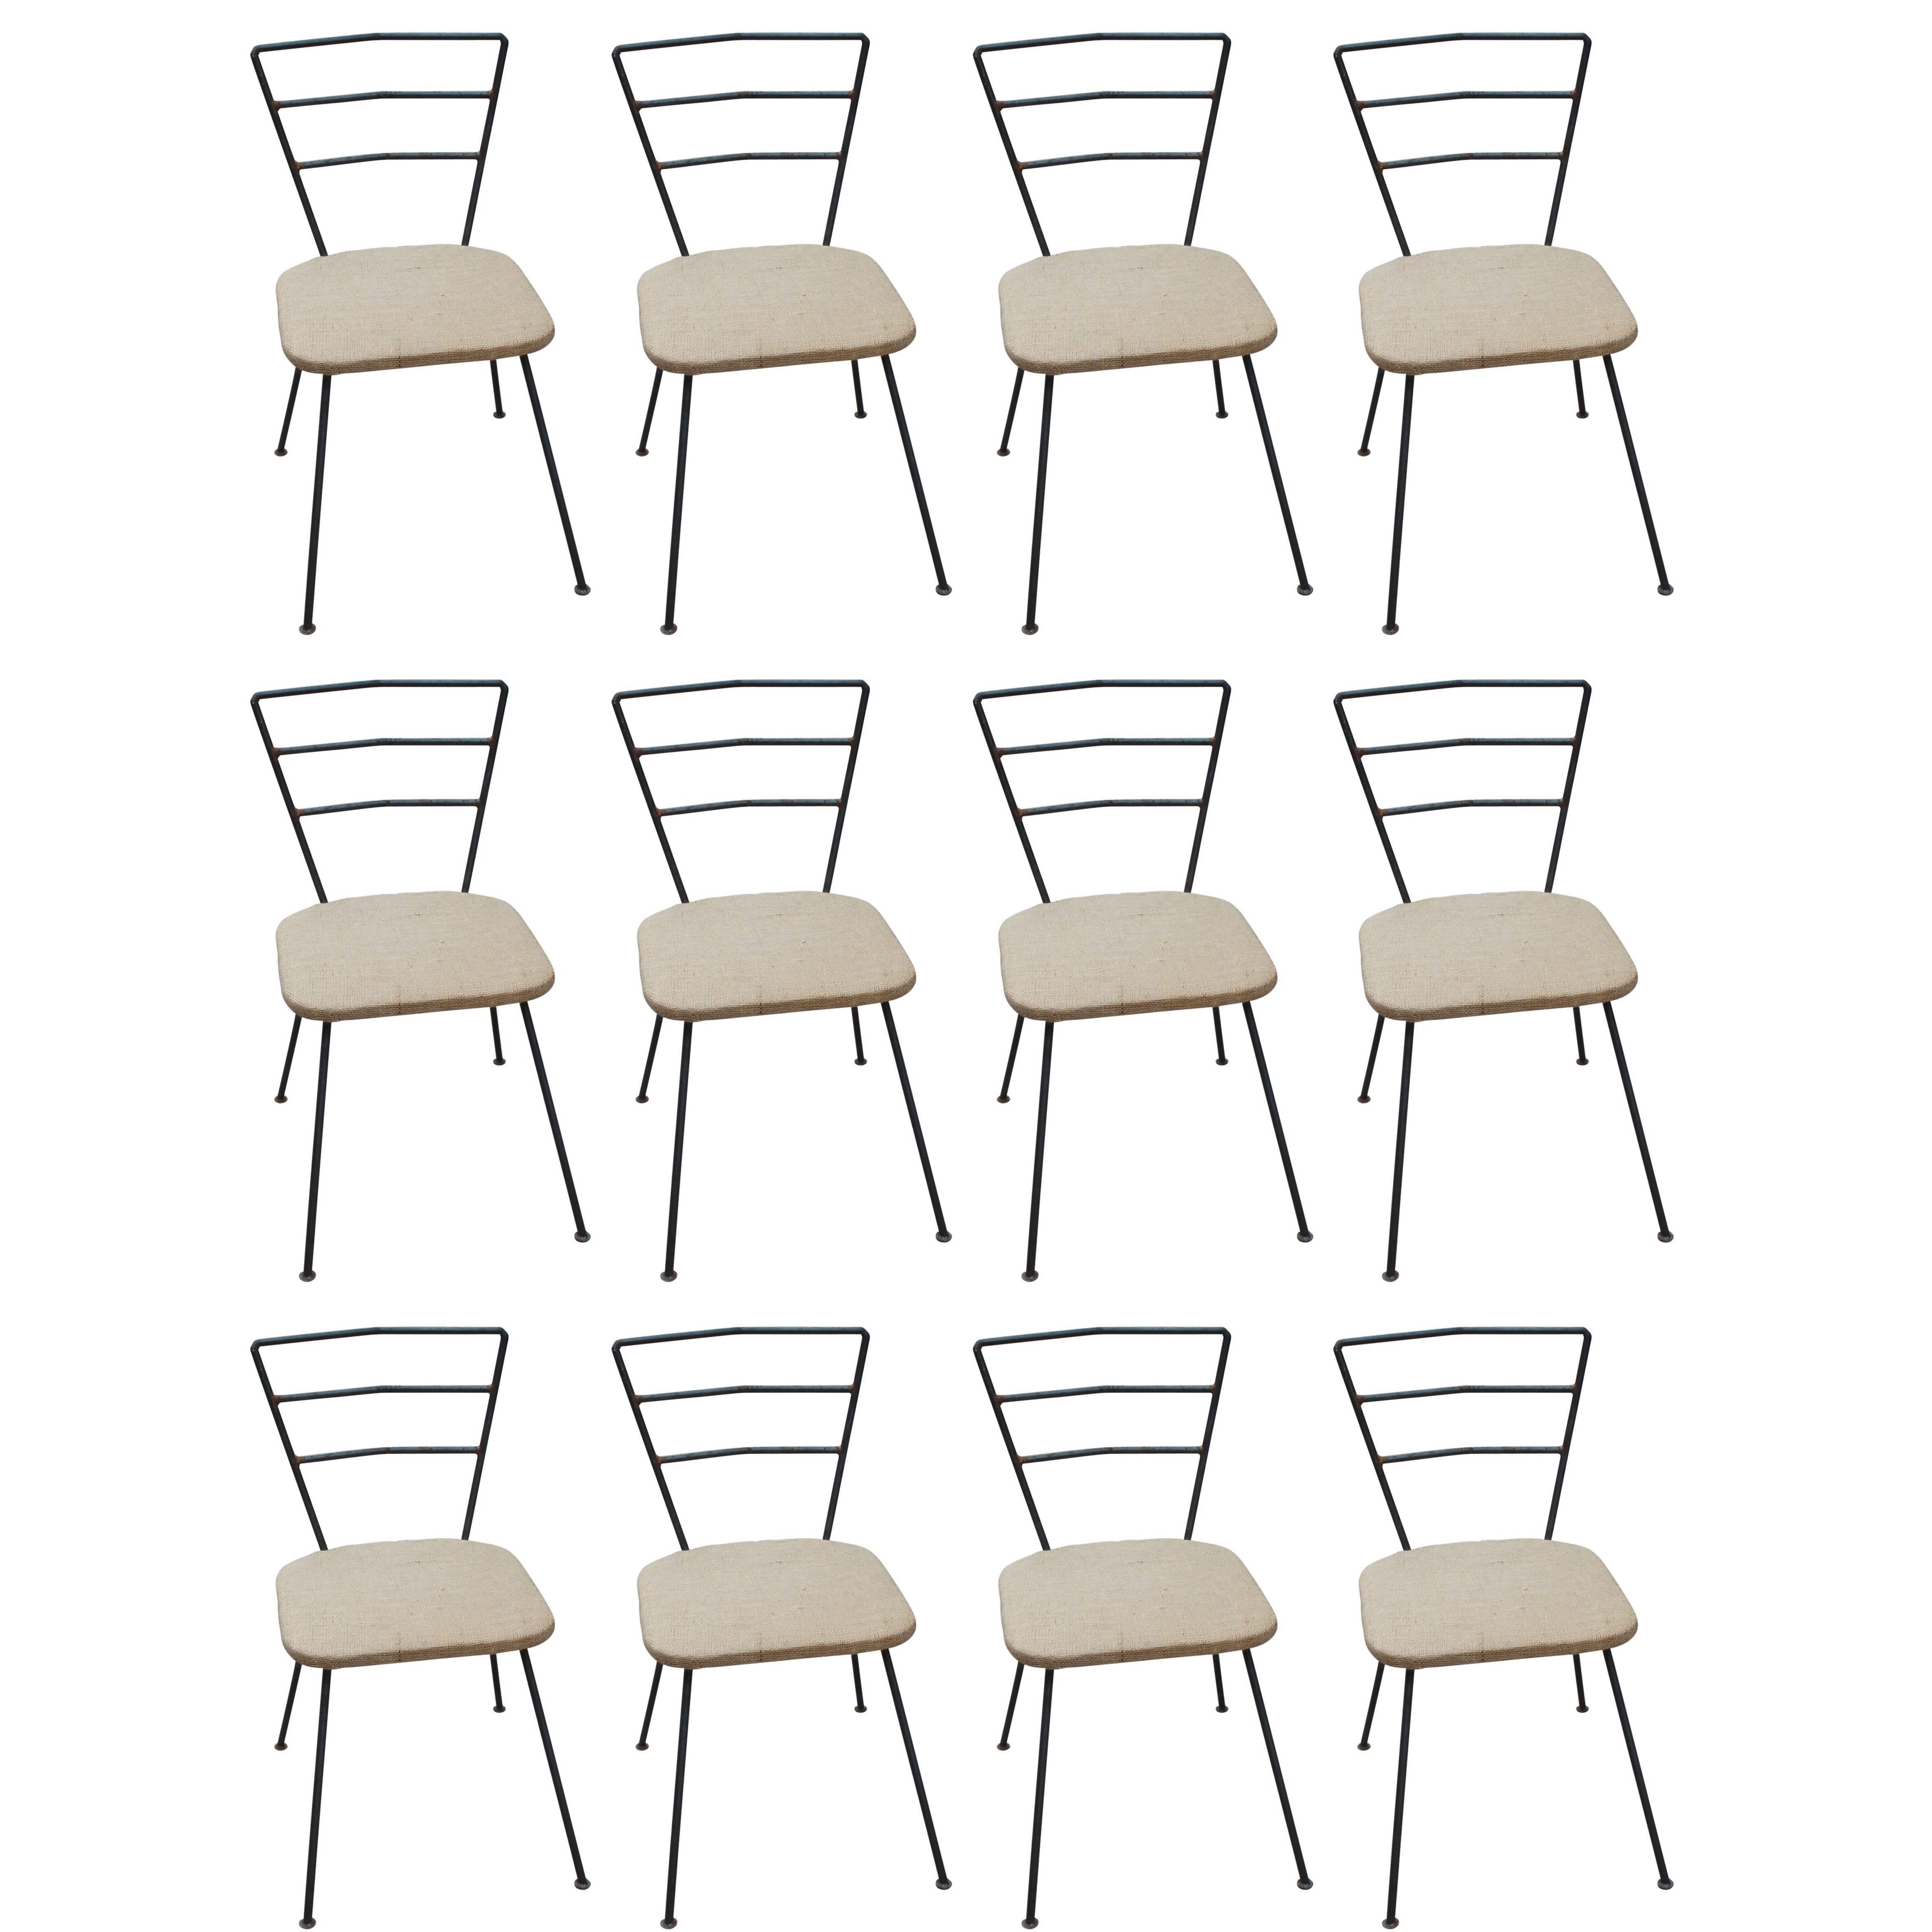 Set of 12 Modern Handmade Iron Ladder Back Dining Chairs with Canvas Seats